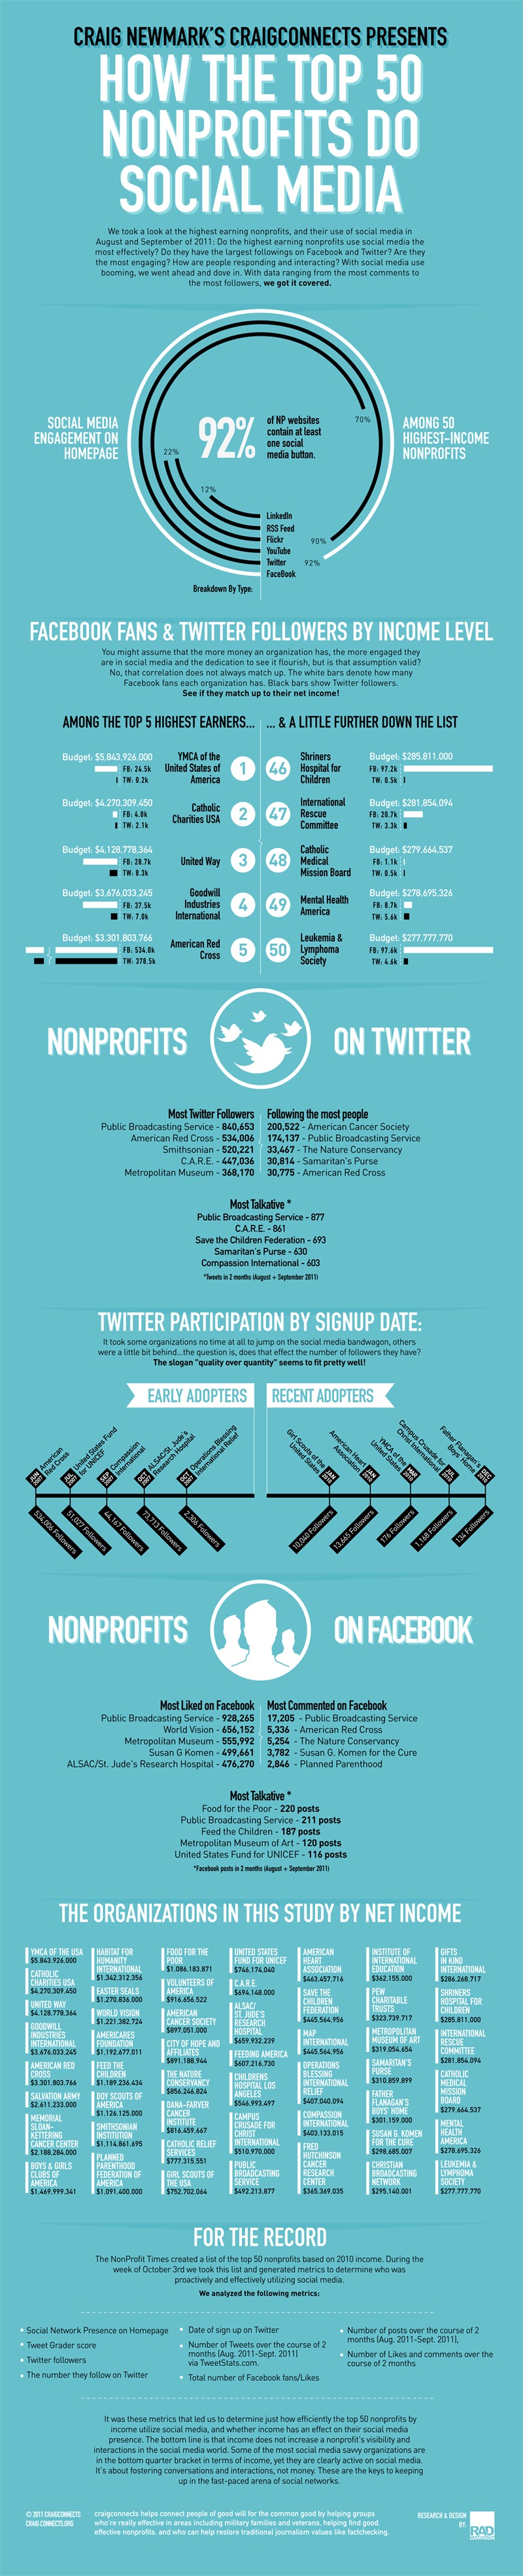 non-profit social strategy infographic